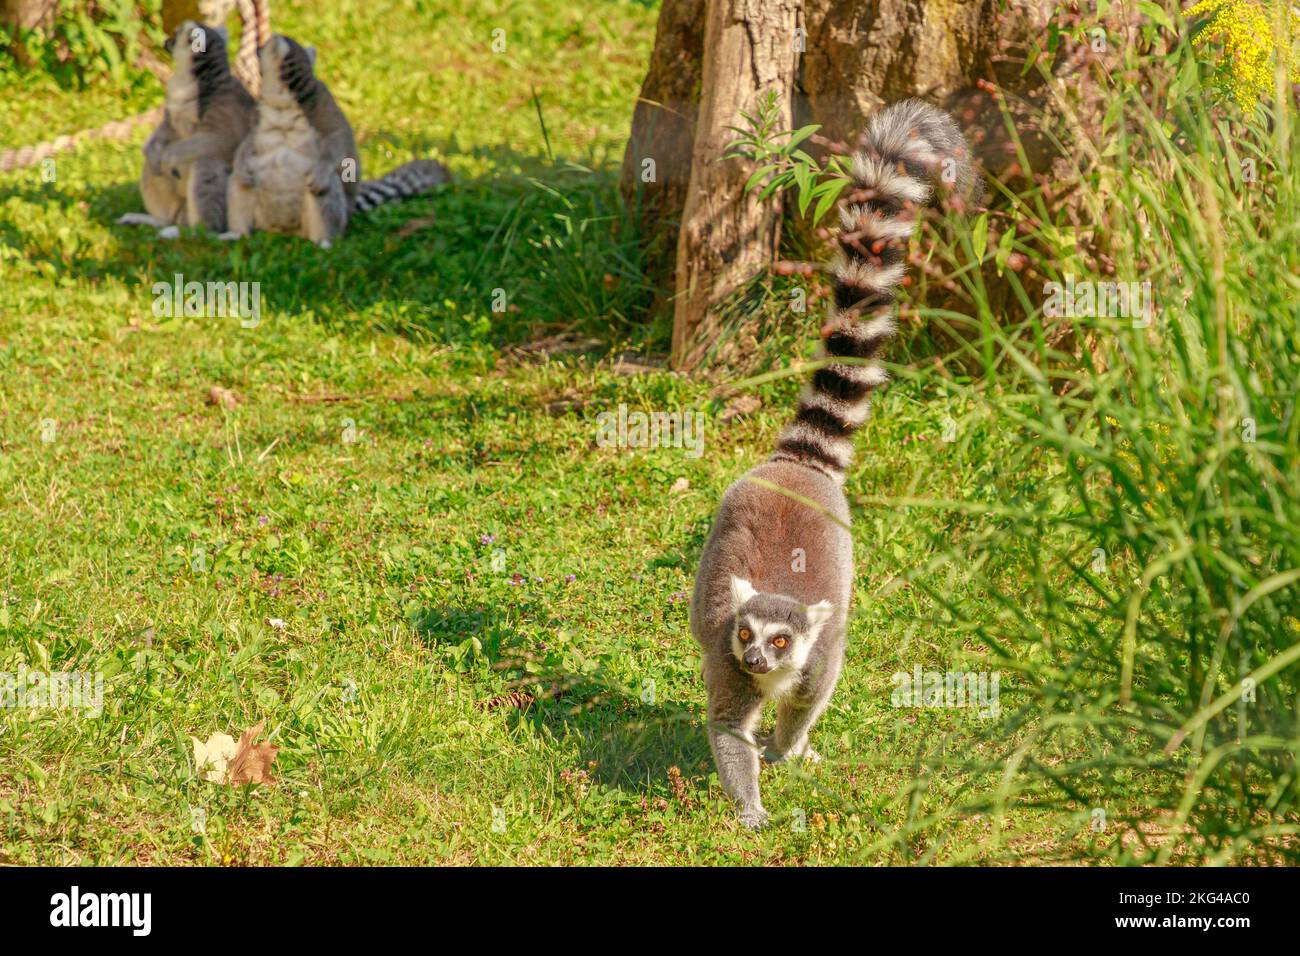 African ring-tailed lemur of Madagascar. Lemur catta species endemic to the island of Madagascar in Africa. Stock Photo